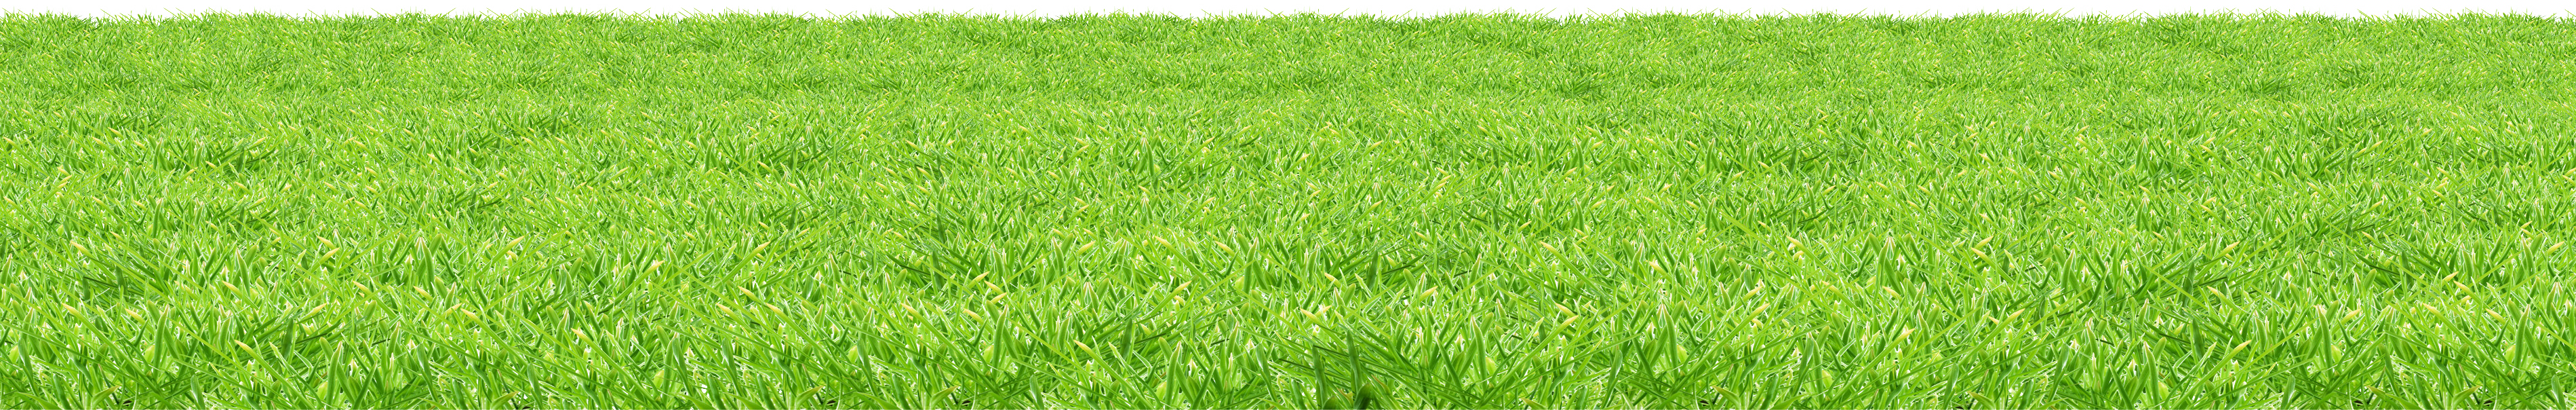 Download PNG image - Lawn Grass PNG Background Image 